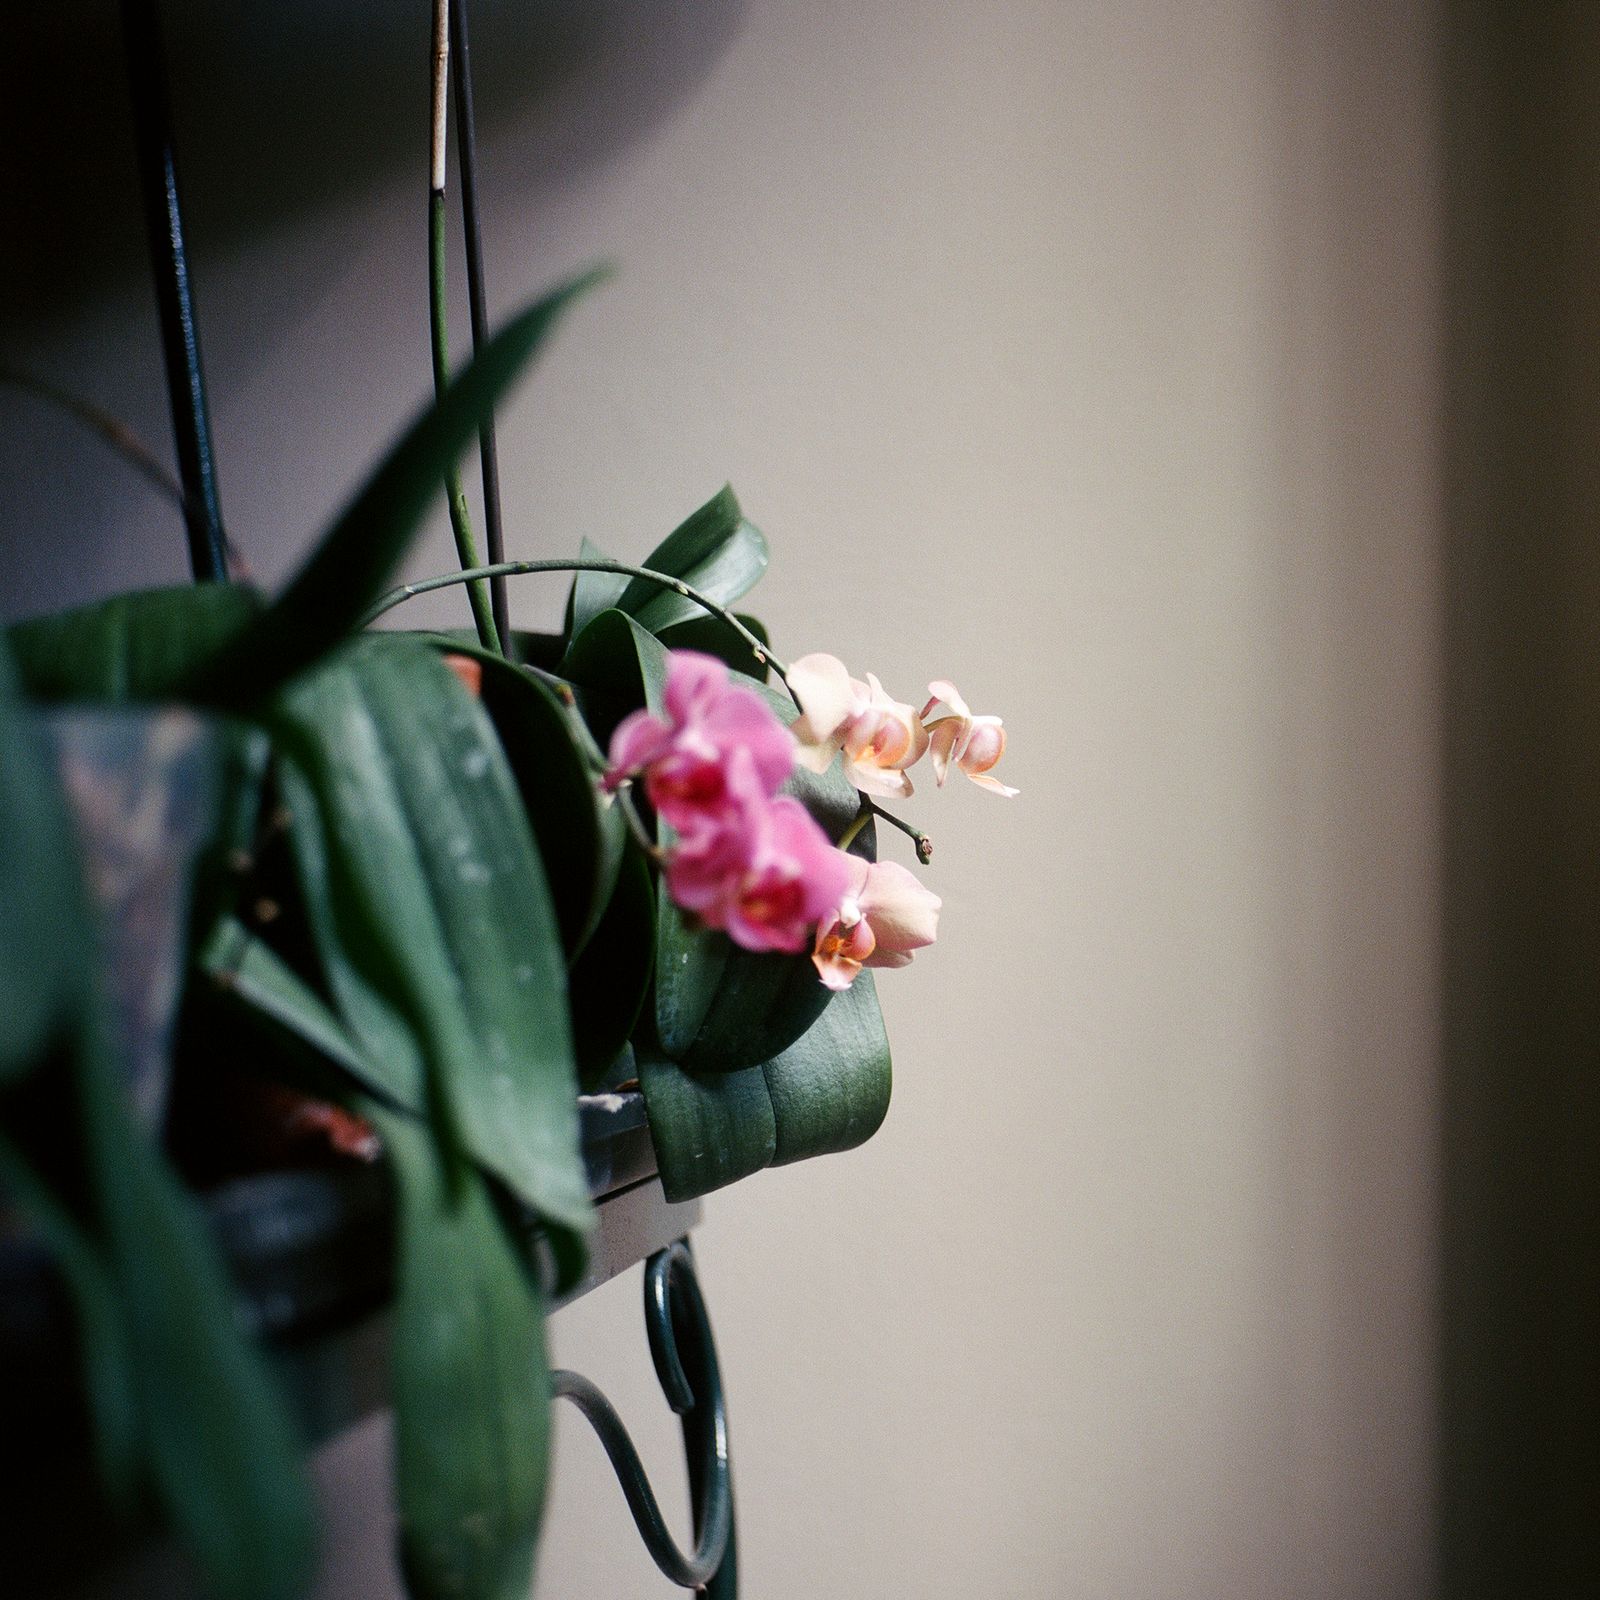 © Nadiya I. Nacorda - Image from the All the Orchids are Fine photography project